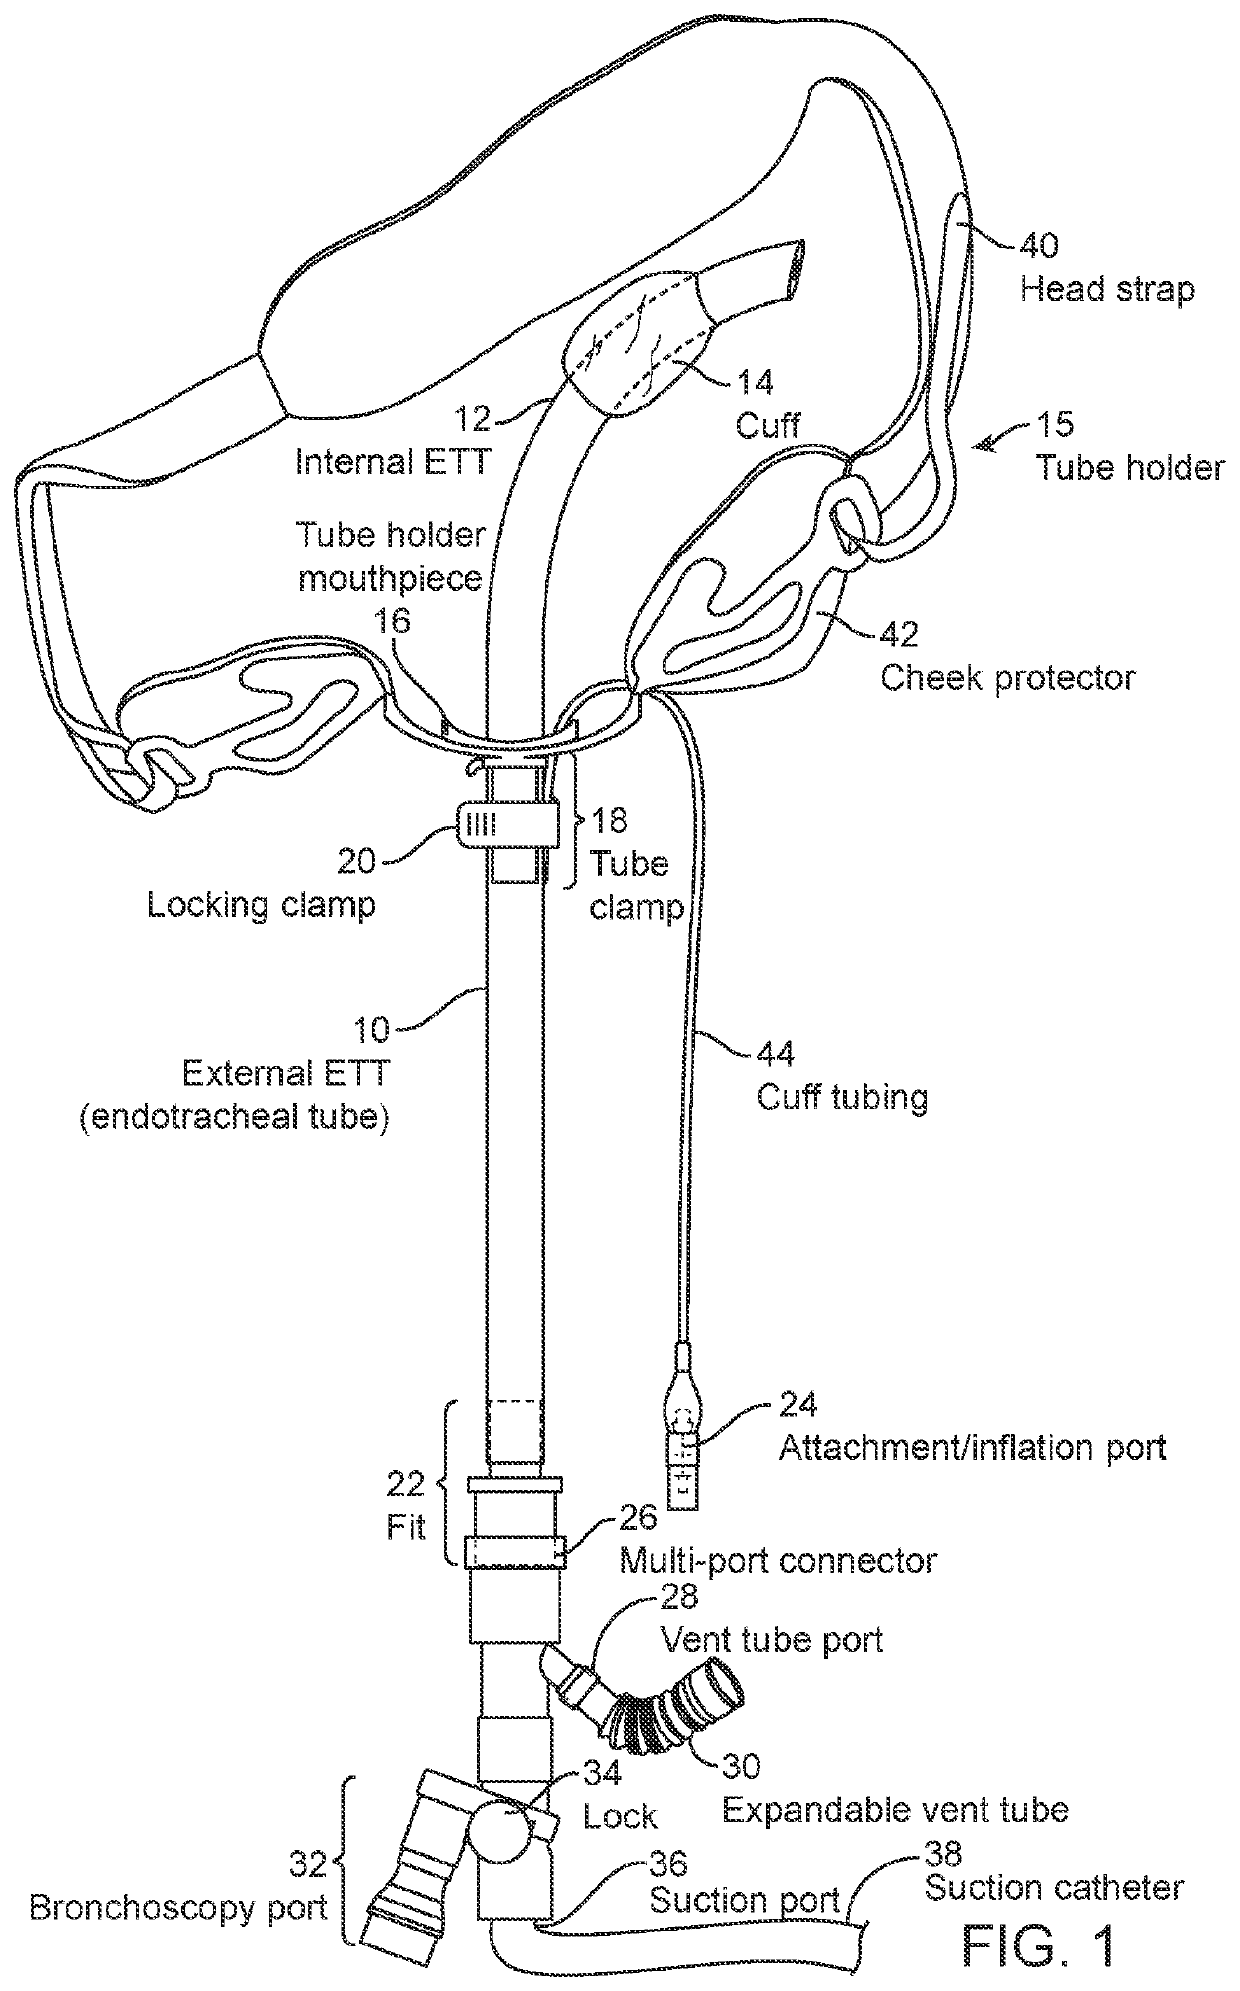 Endotracheal tube guard with optional holding system and optional sensor